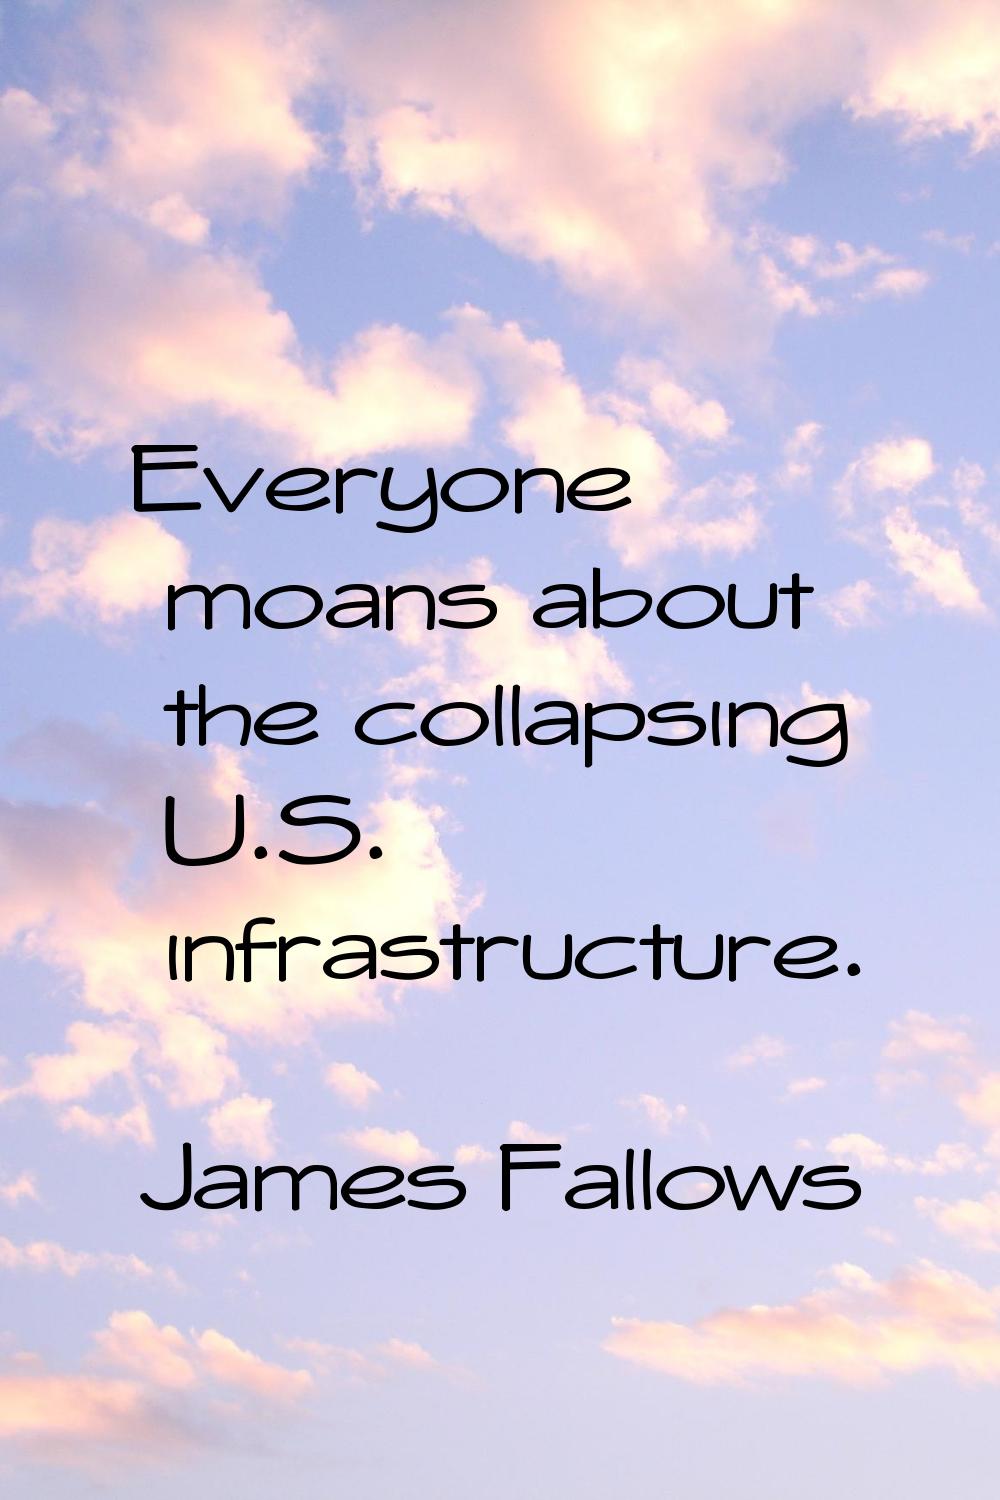 Everyone moans about the collapsing U.S. infrastructure.